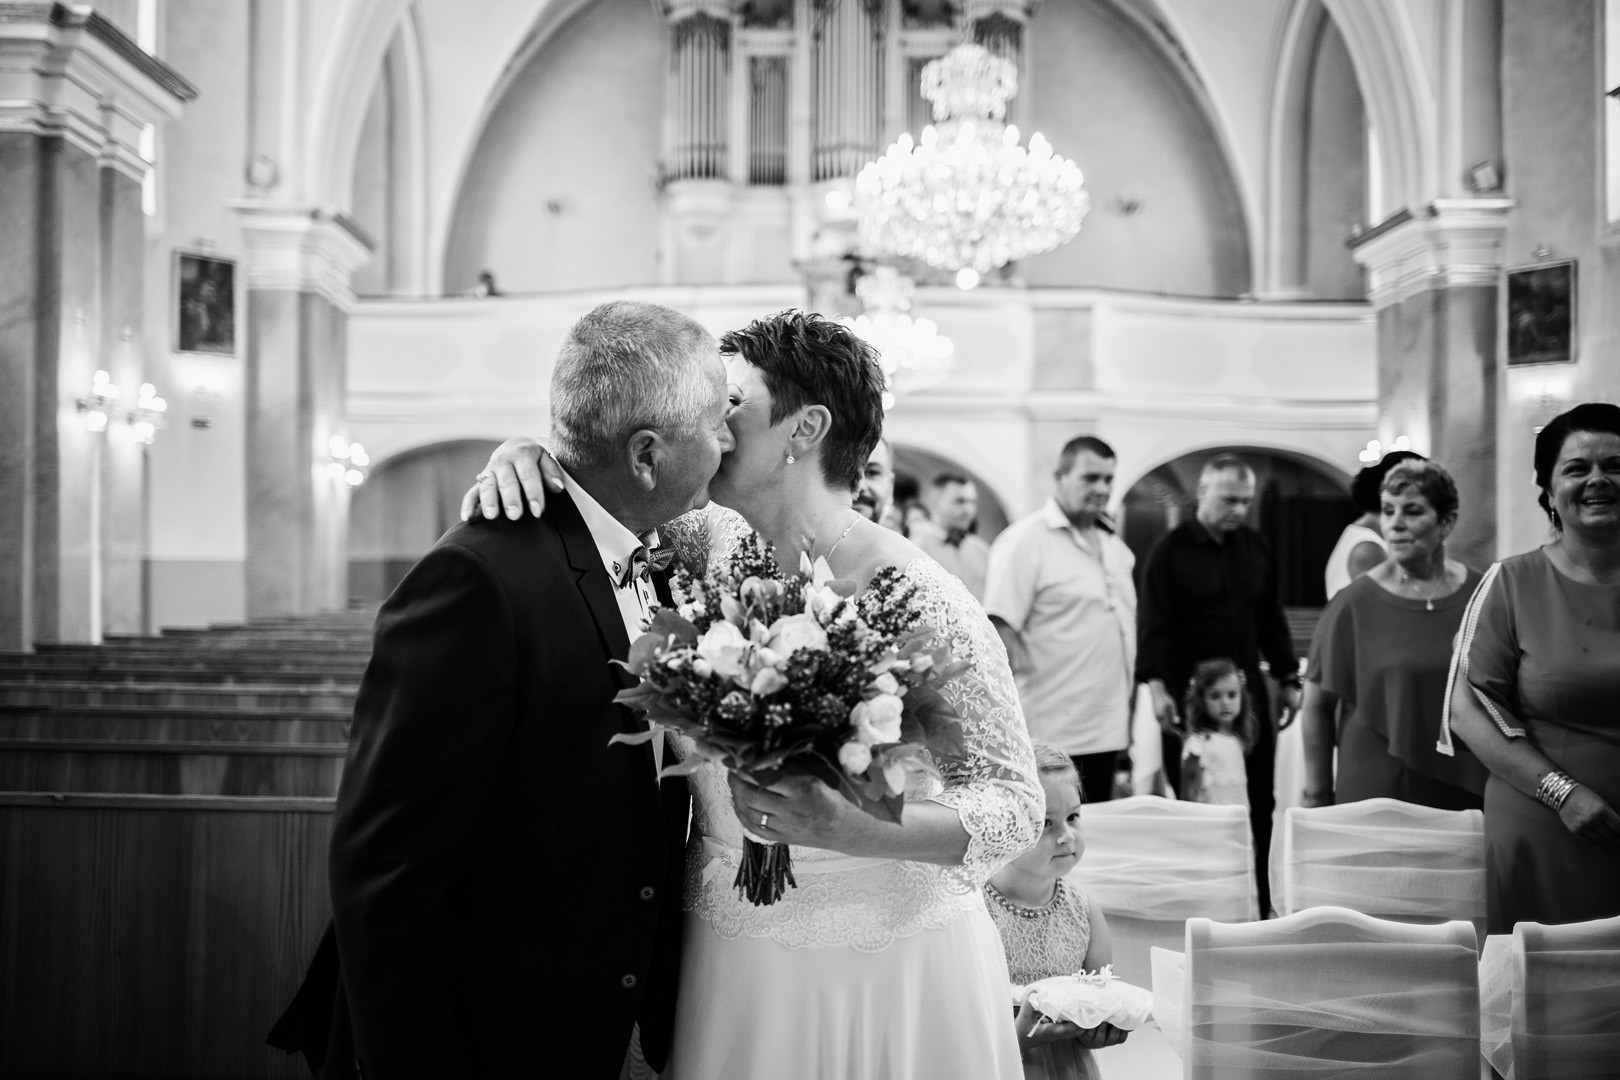 Wedding photos from the Slovak-Italian wedding of Mirka and Baldy in the beautiful surroundings of the Gbeľany Manor House - 0020.jpg